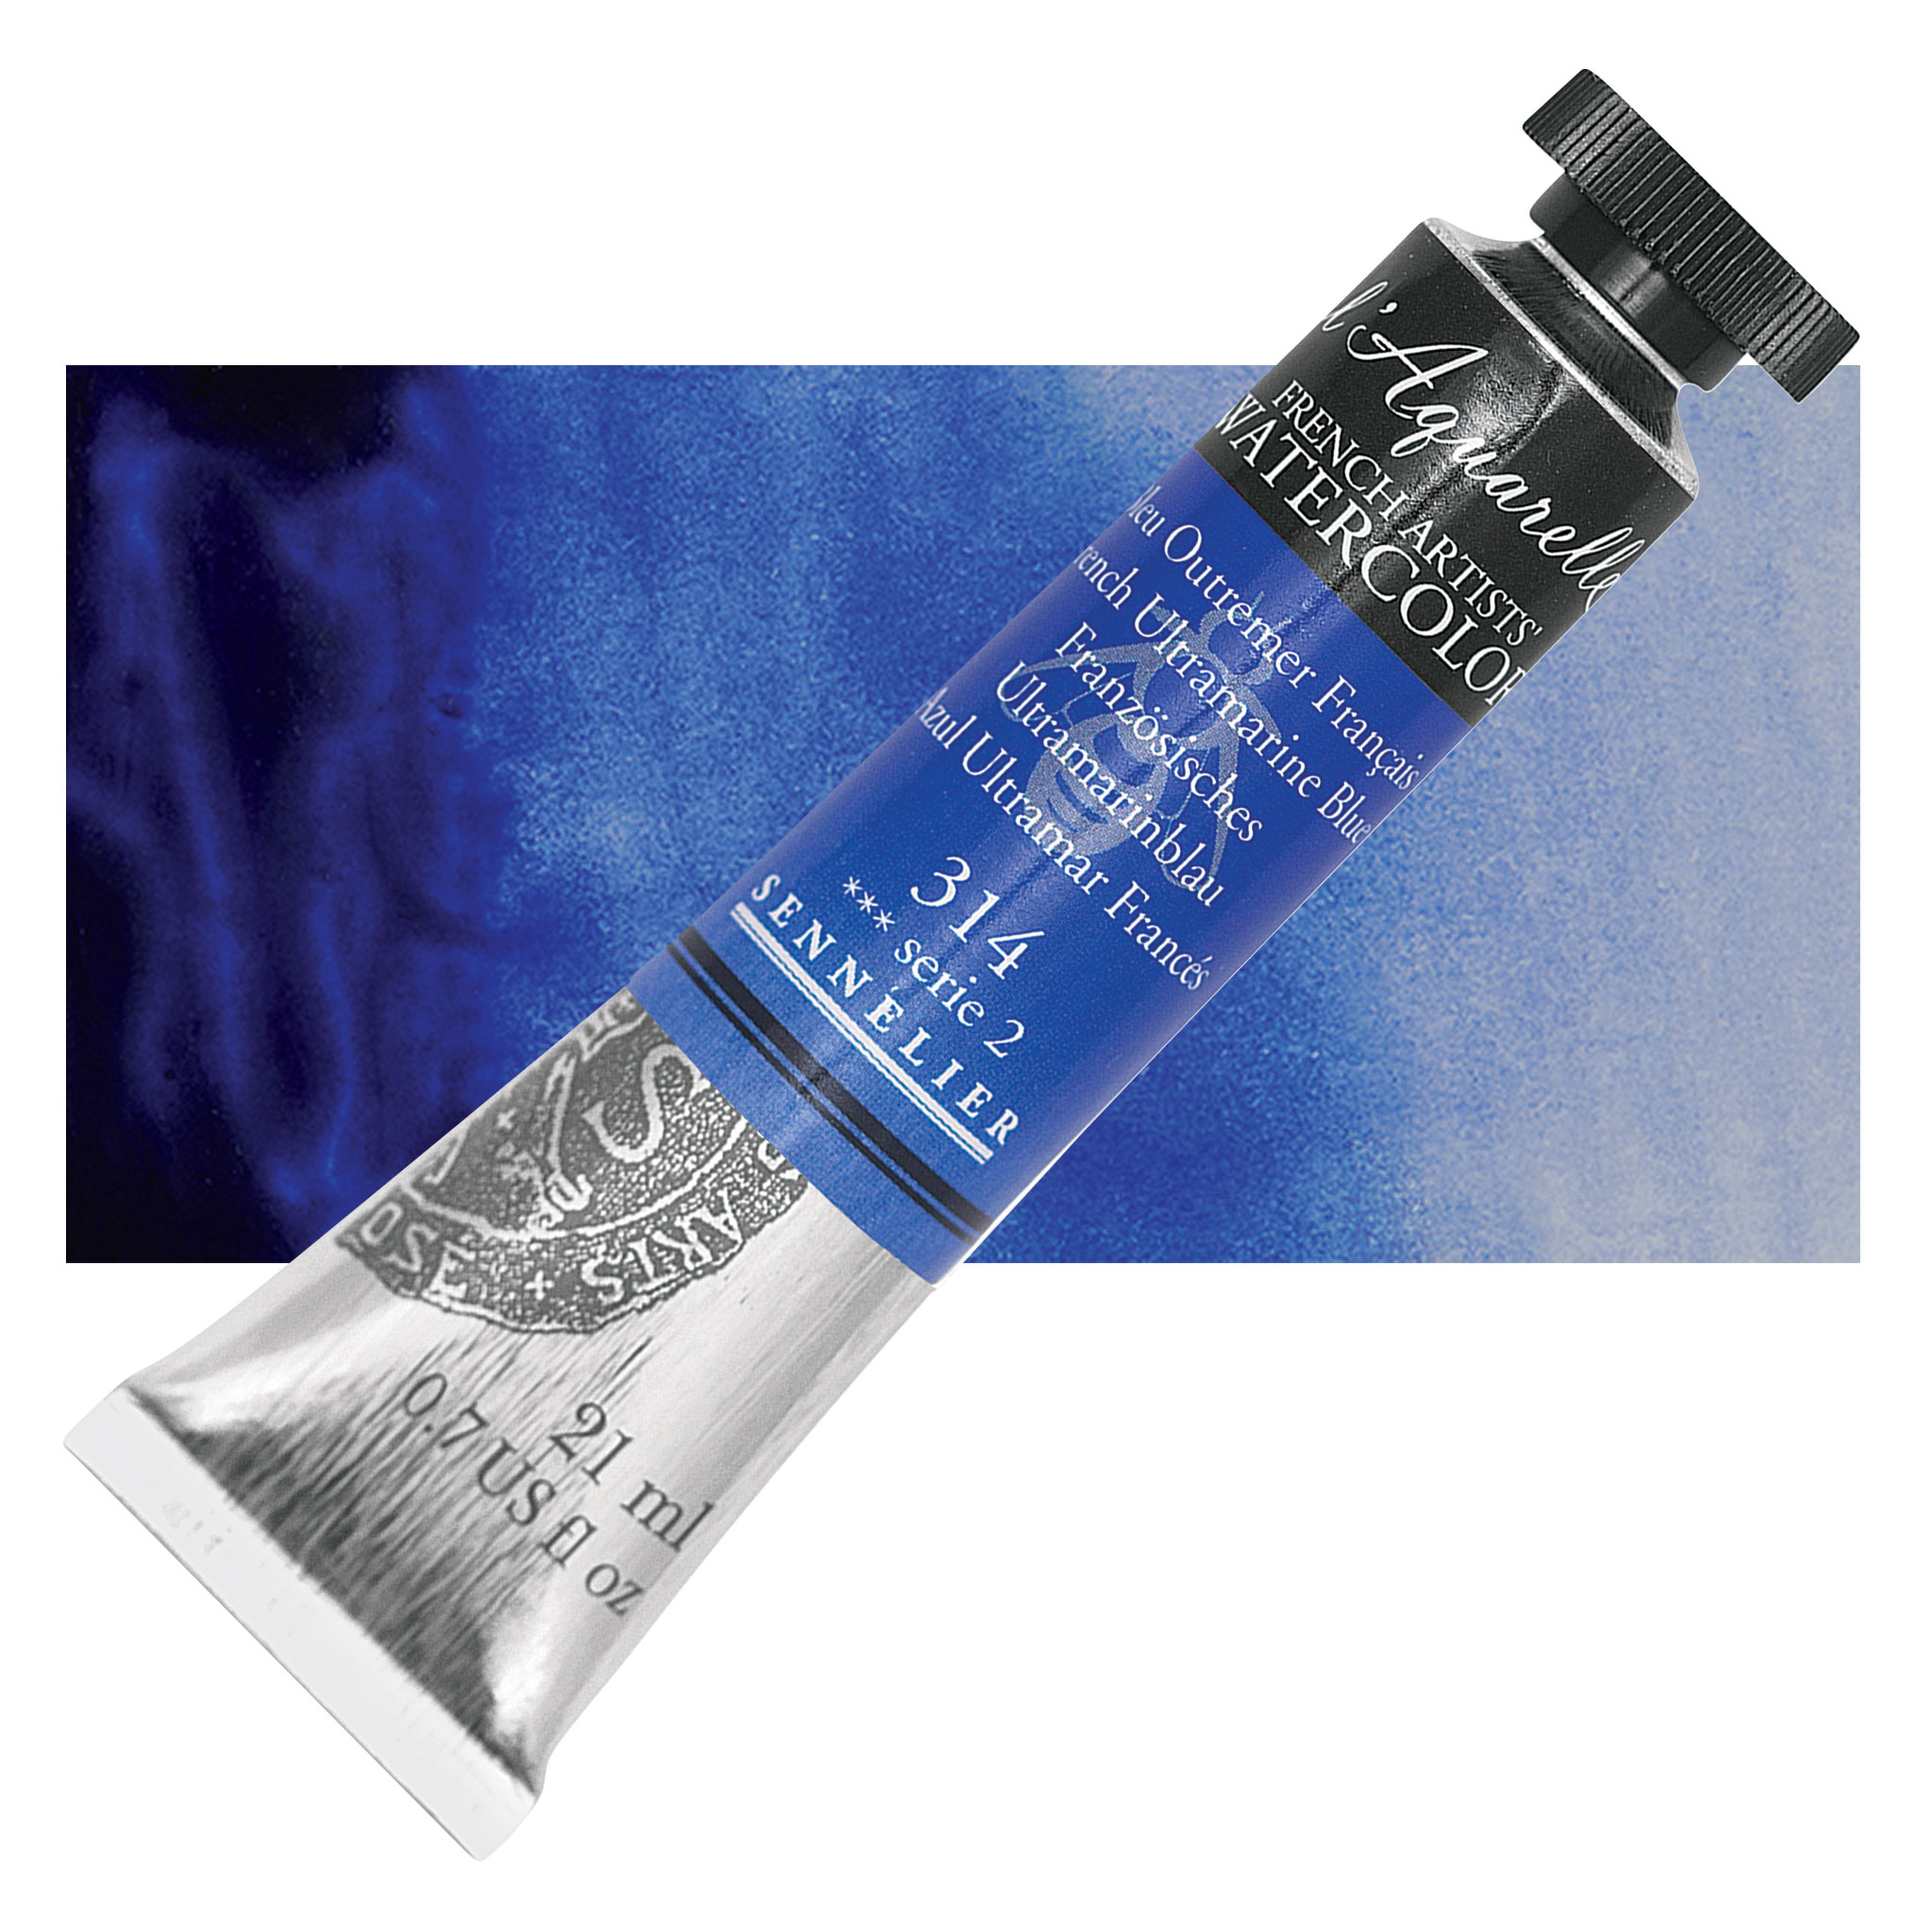 Sennelier French Artists' Watercolor - French Ultramarine Blue 21 ml